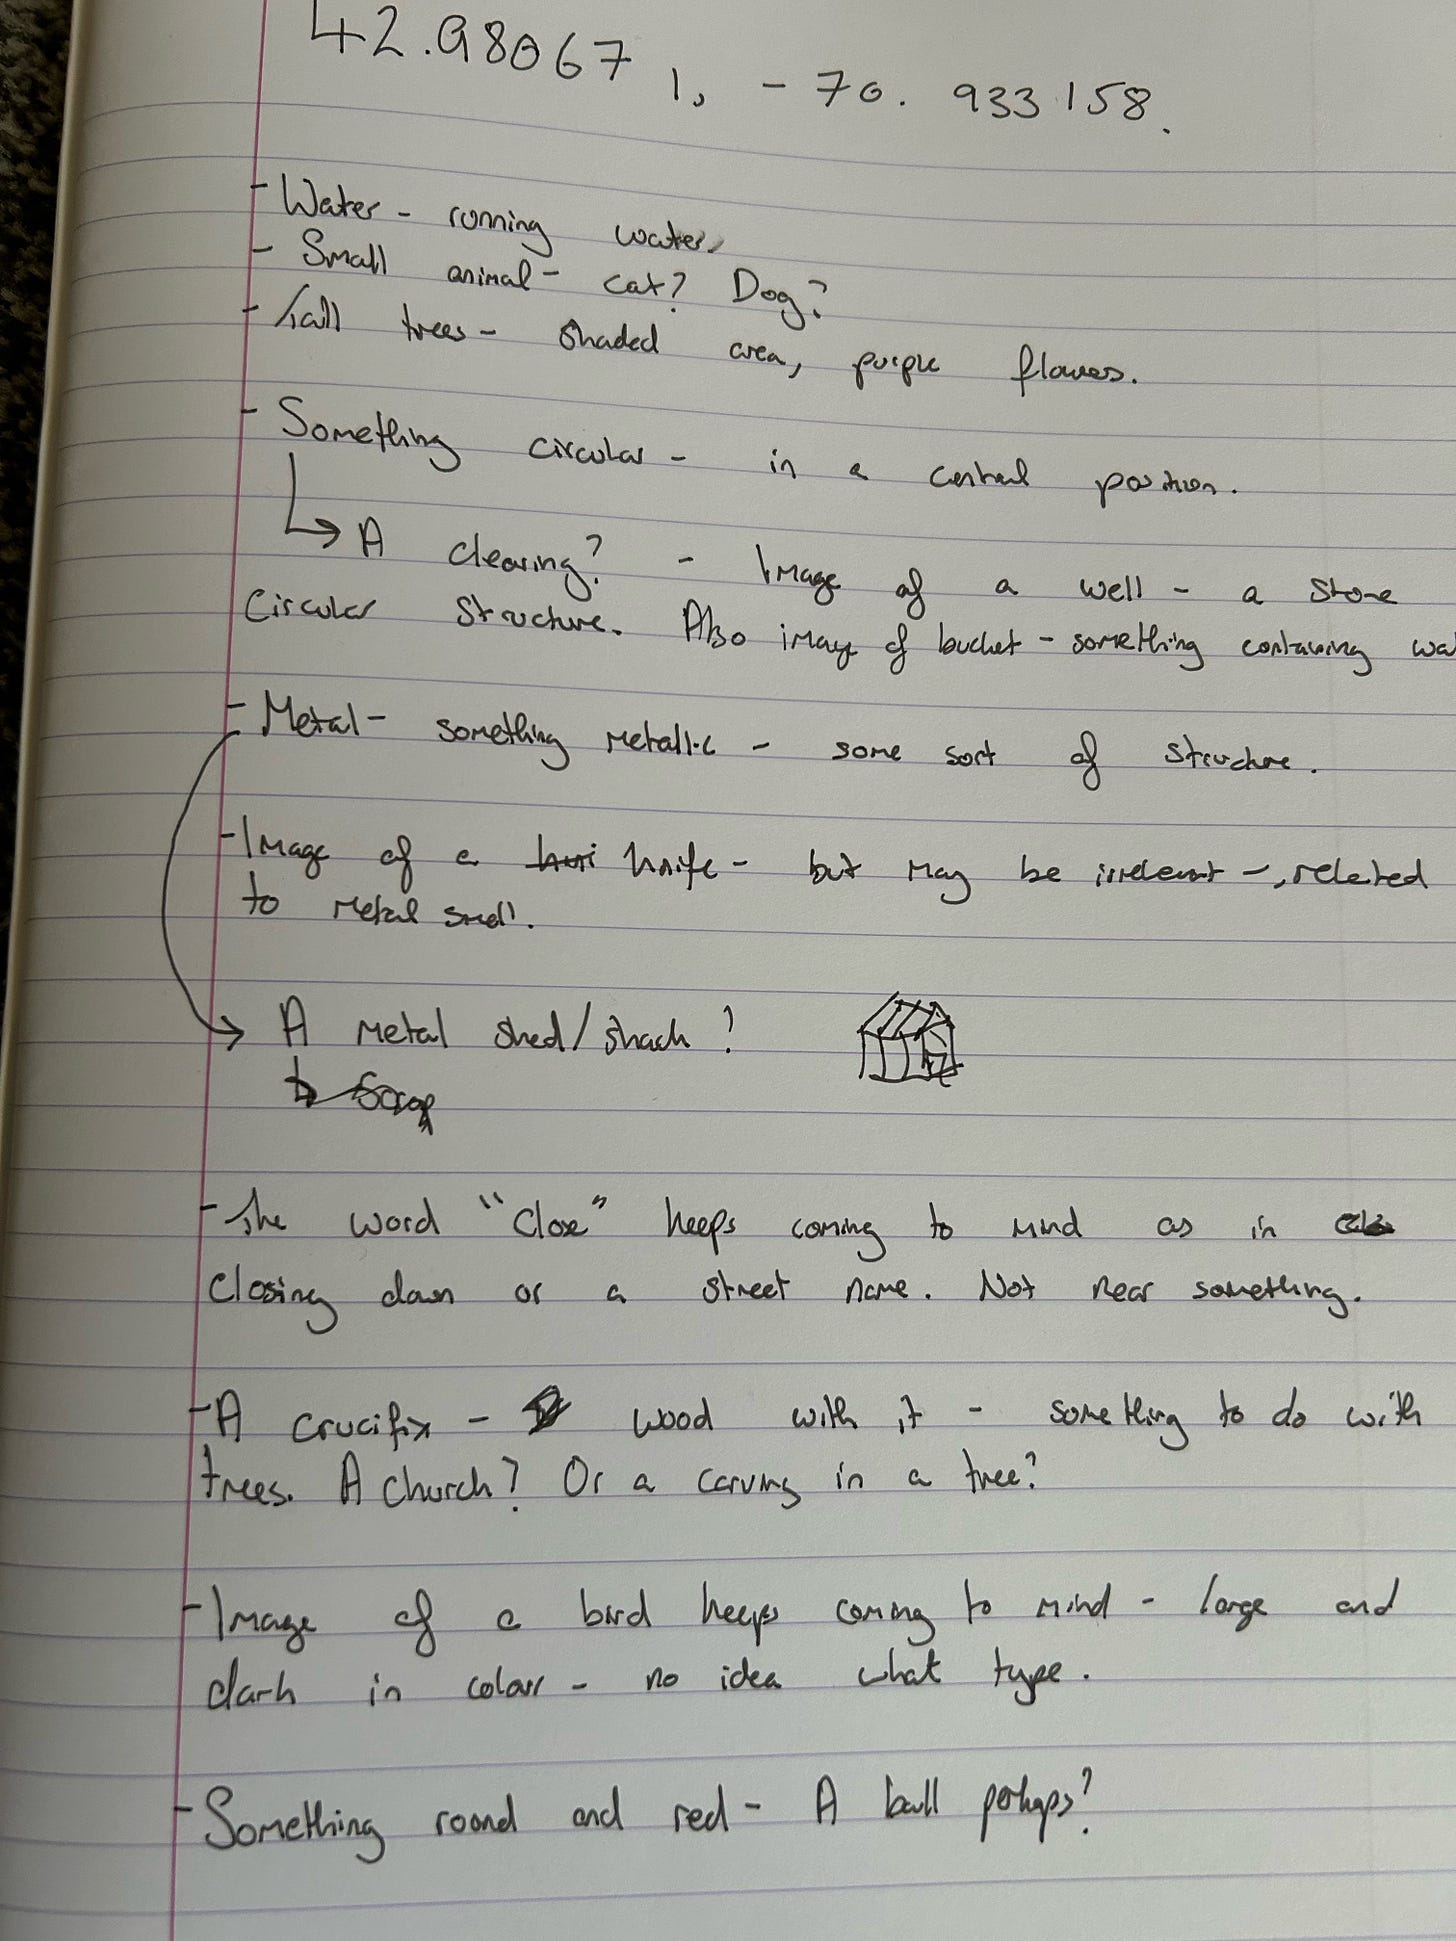 A photo of Viewer #6's session notes